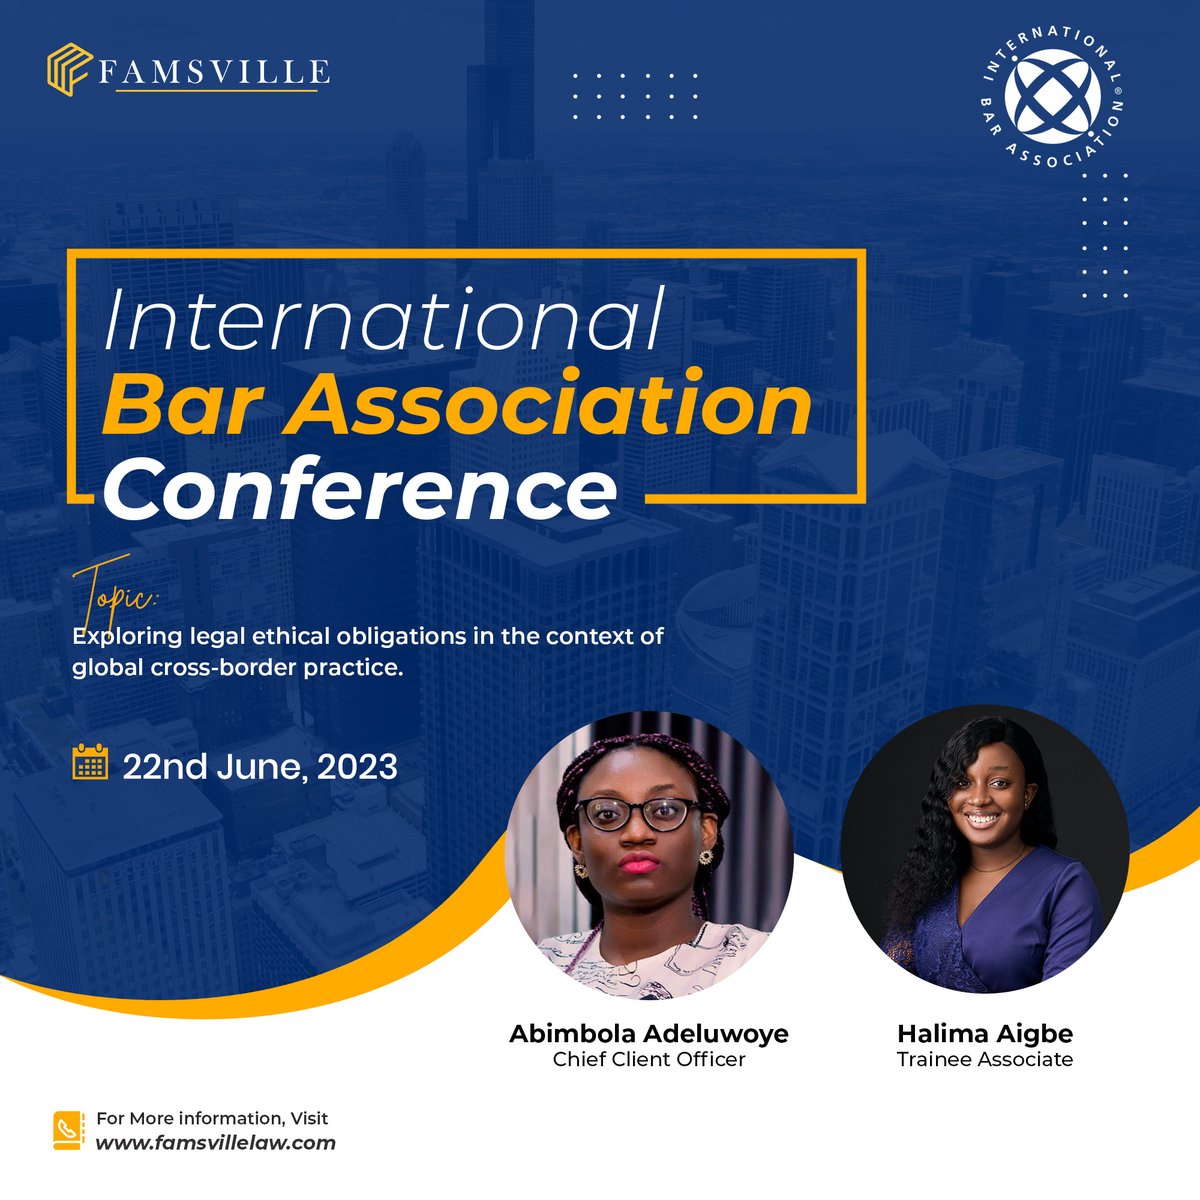 Today, Famsville's Chief Client Officer, Abimbola Adeluwoye, and Trainee Associate, Halima Aigbe, will attend the International Bar Association's webinar on 'Exploring legal ethical obligations in global cross-border practice.'
#LegalEthics #CrossBorderPractice #GlobalLegalEthics